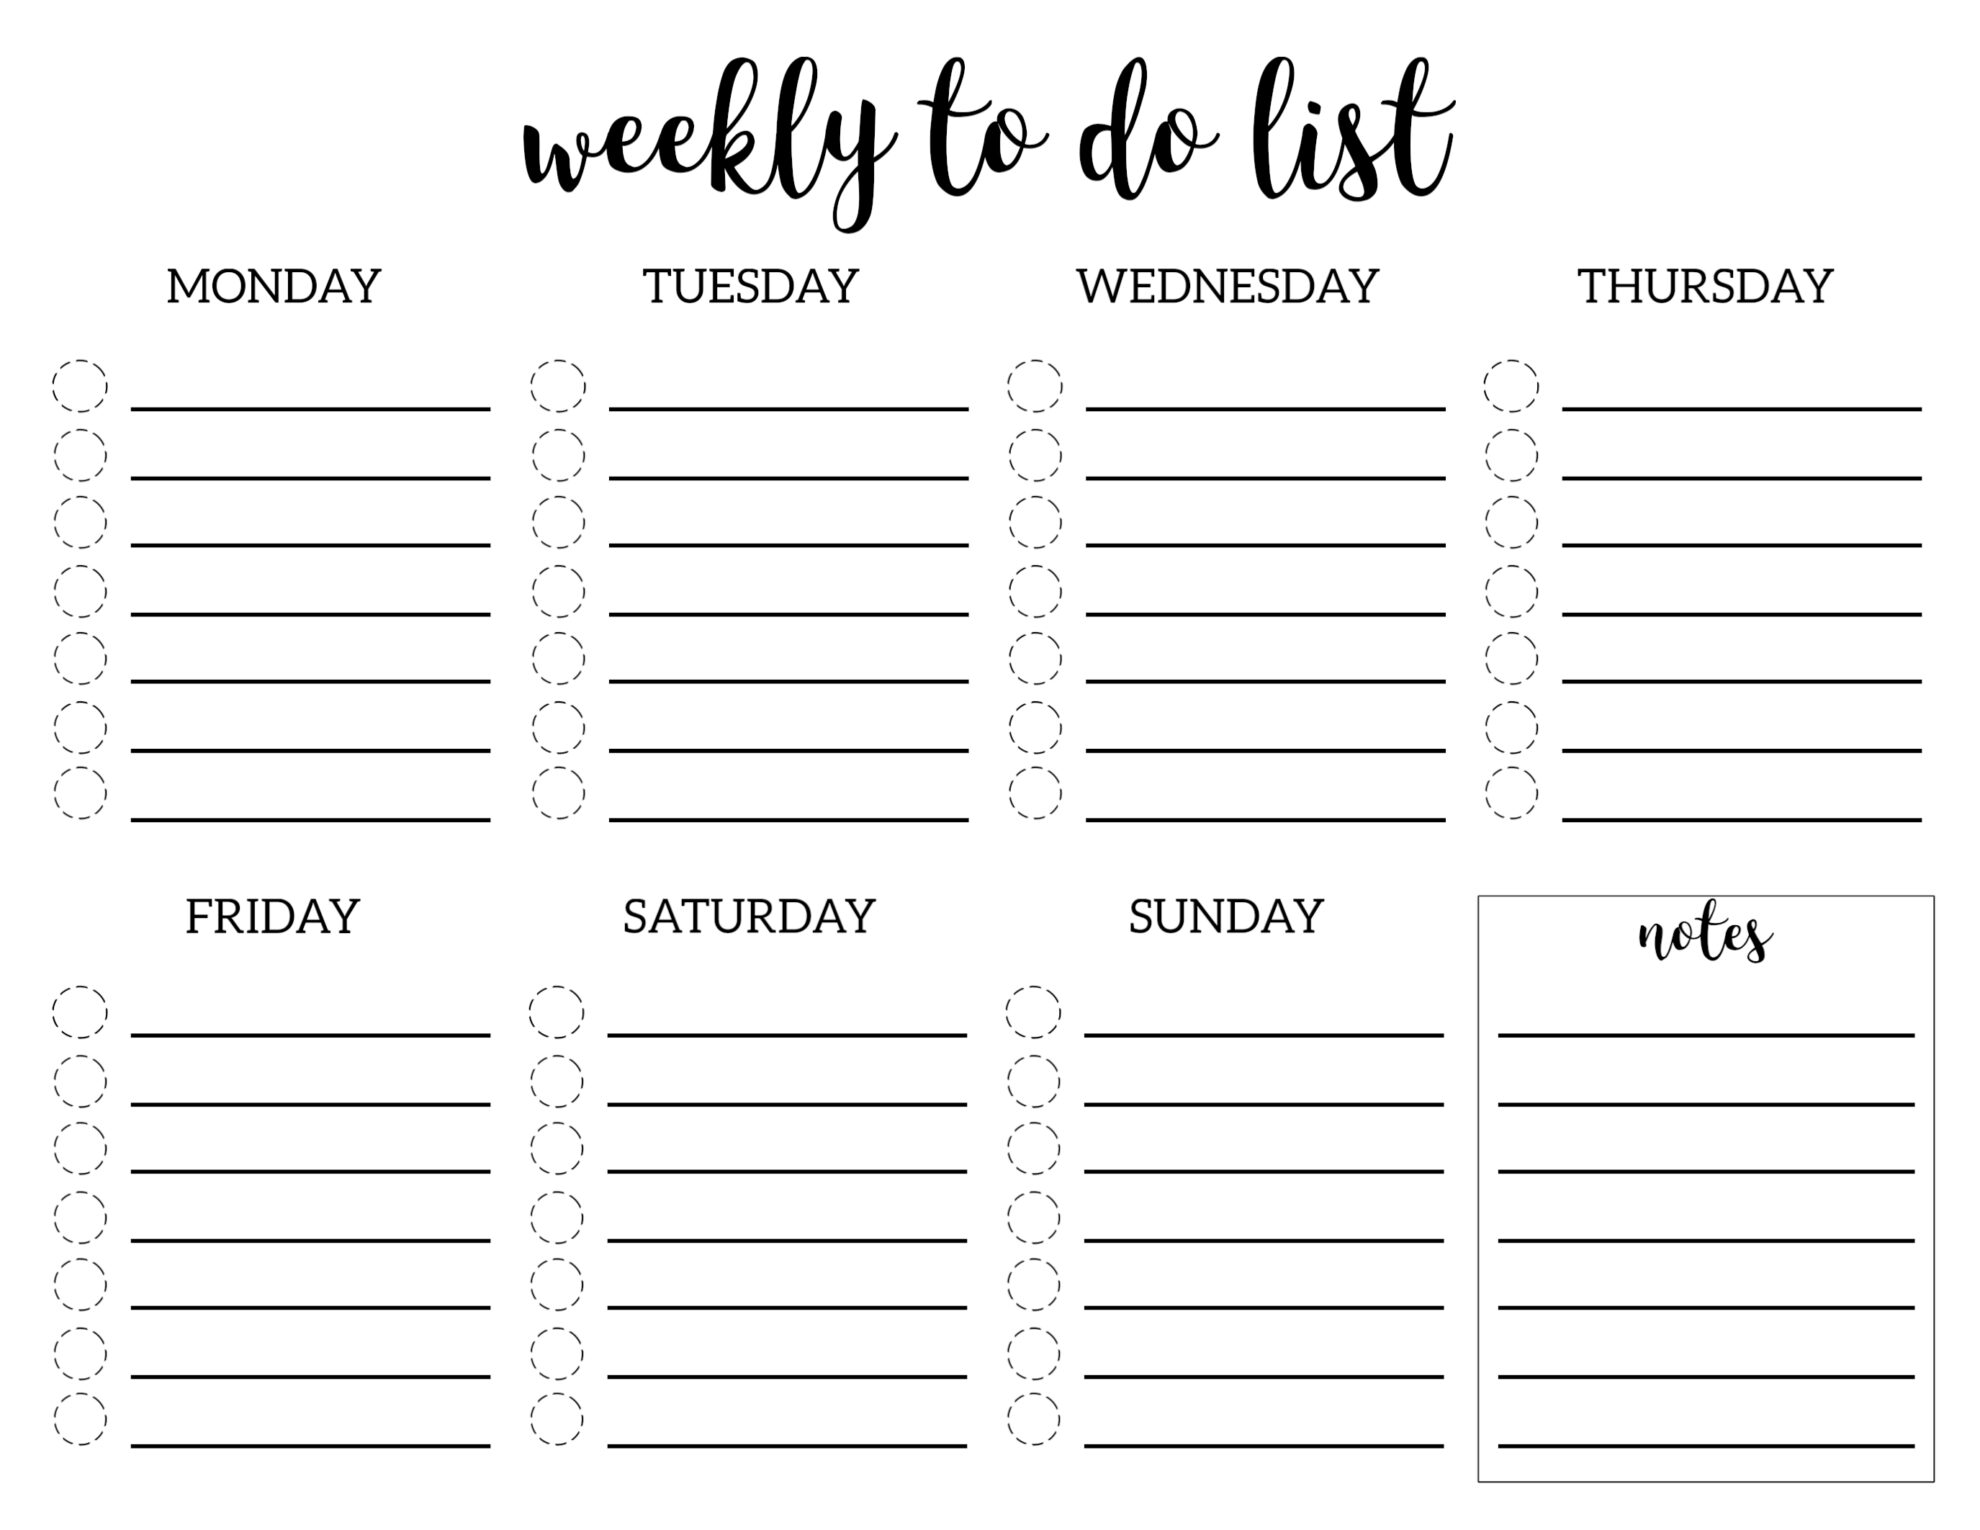 black-and-white-to-do-list-nokil